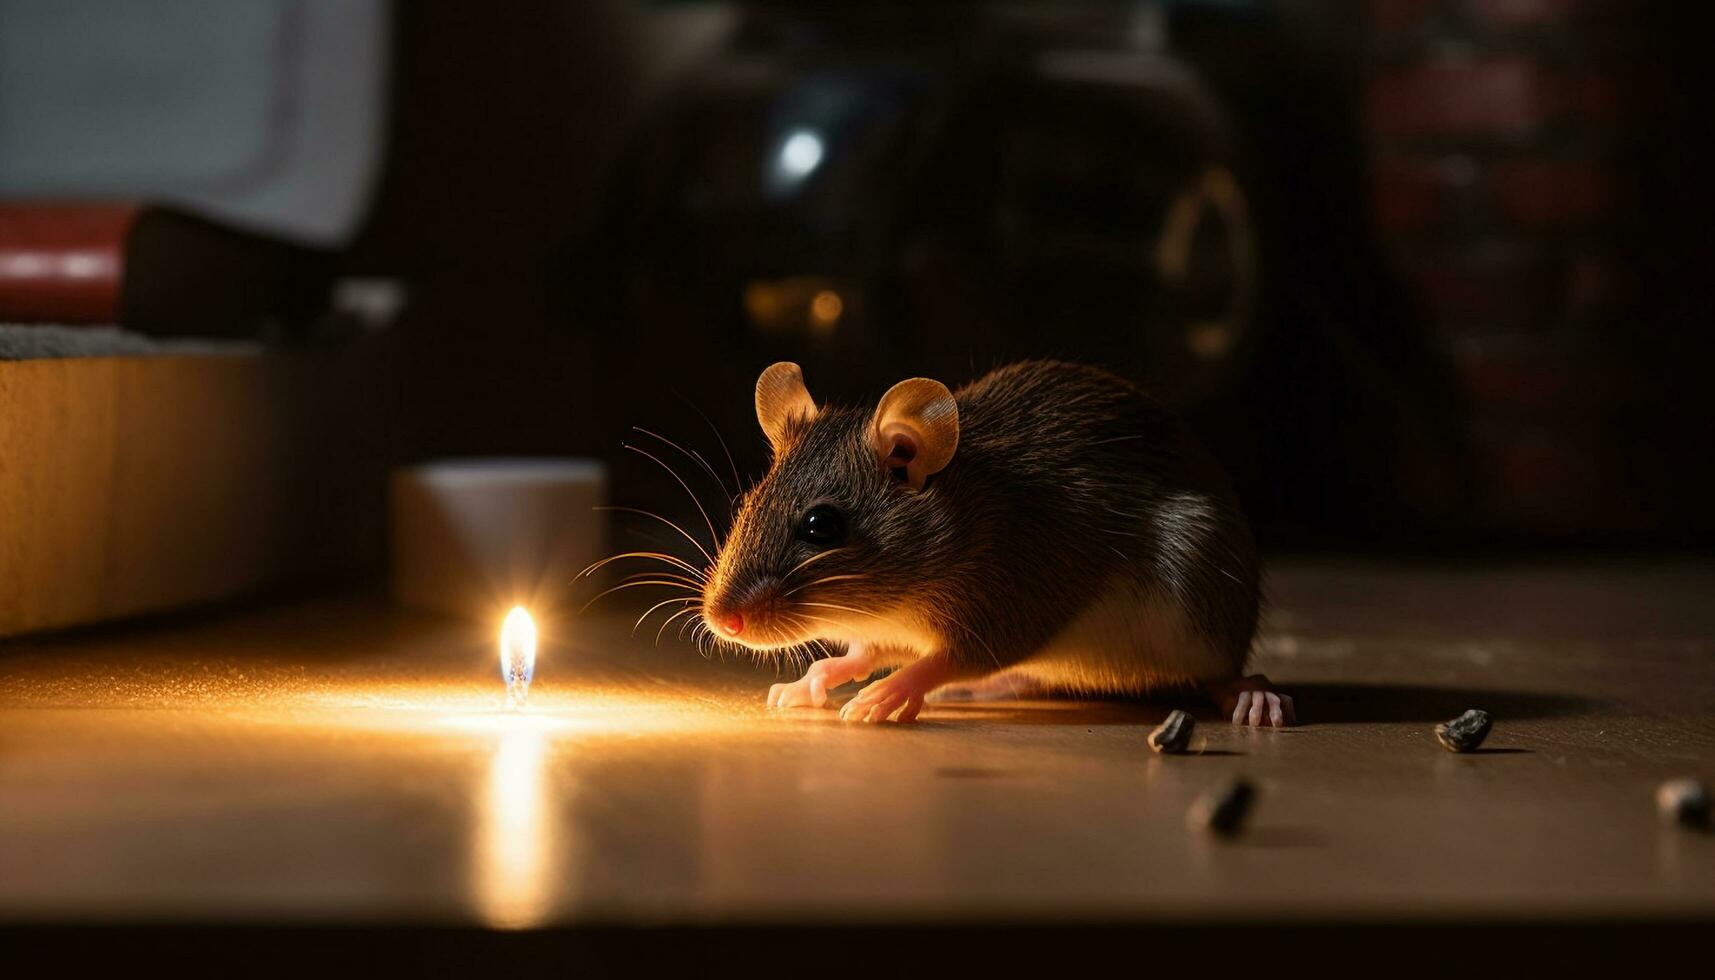 Fluffy rodent with whiskers sitting on table generated by AI photo